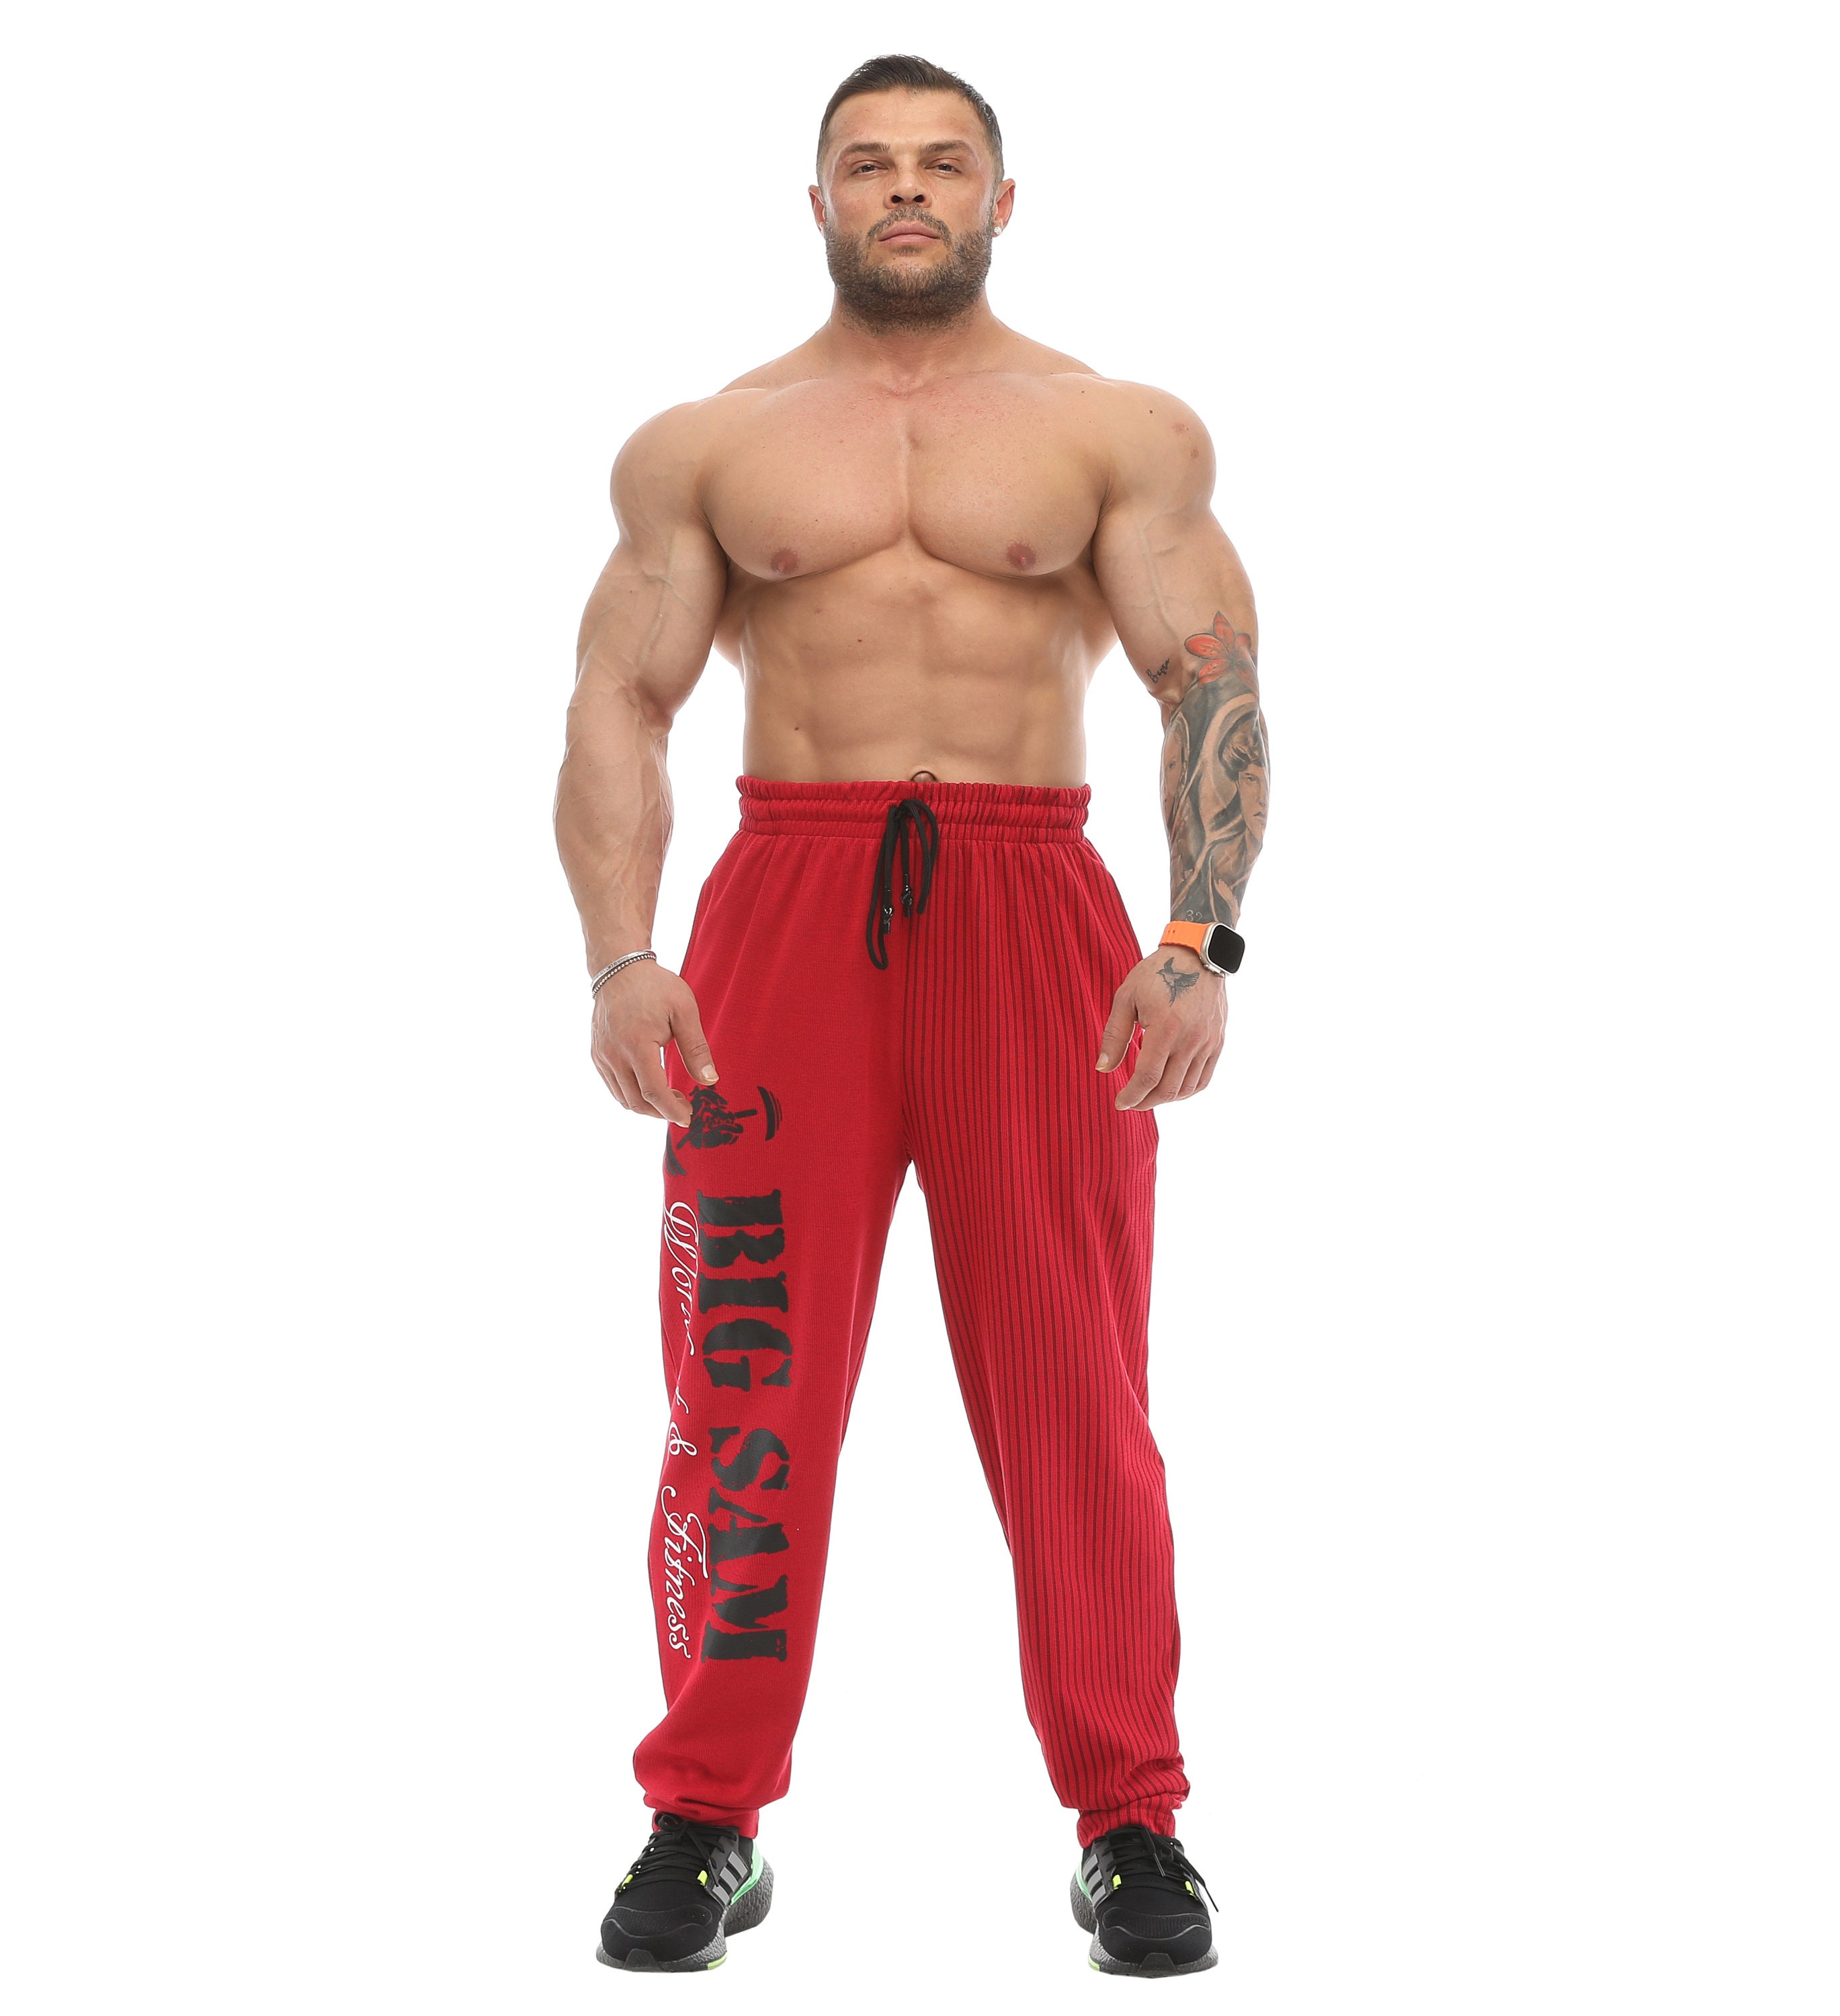 Buy Men's Baggy Sweatpants With Pockets, Oldschool Gym Muscle Pants Gift  for Bodybuilders Online in India 